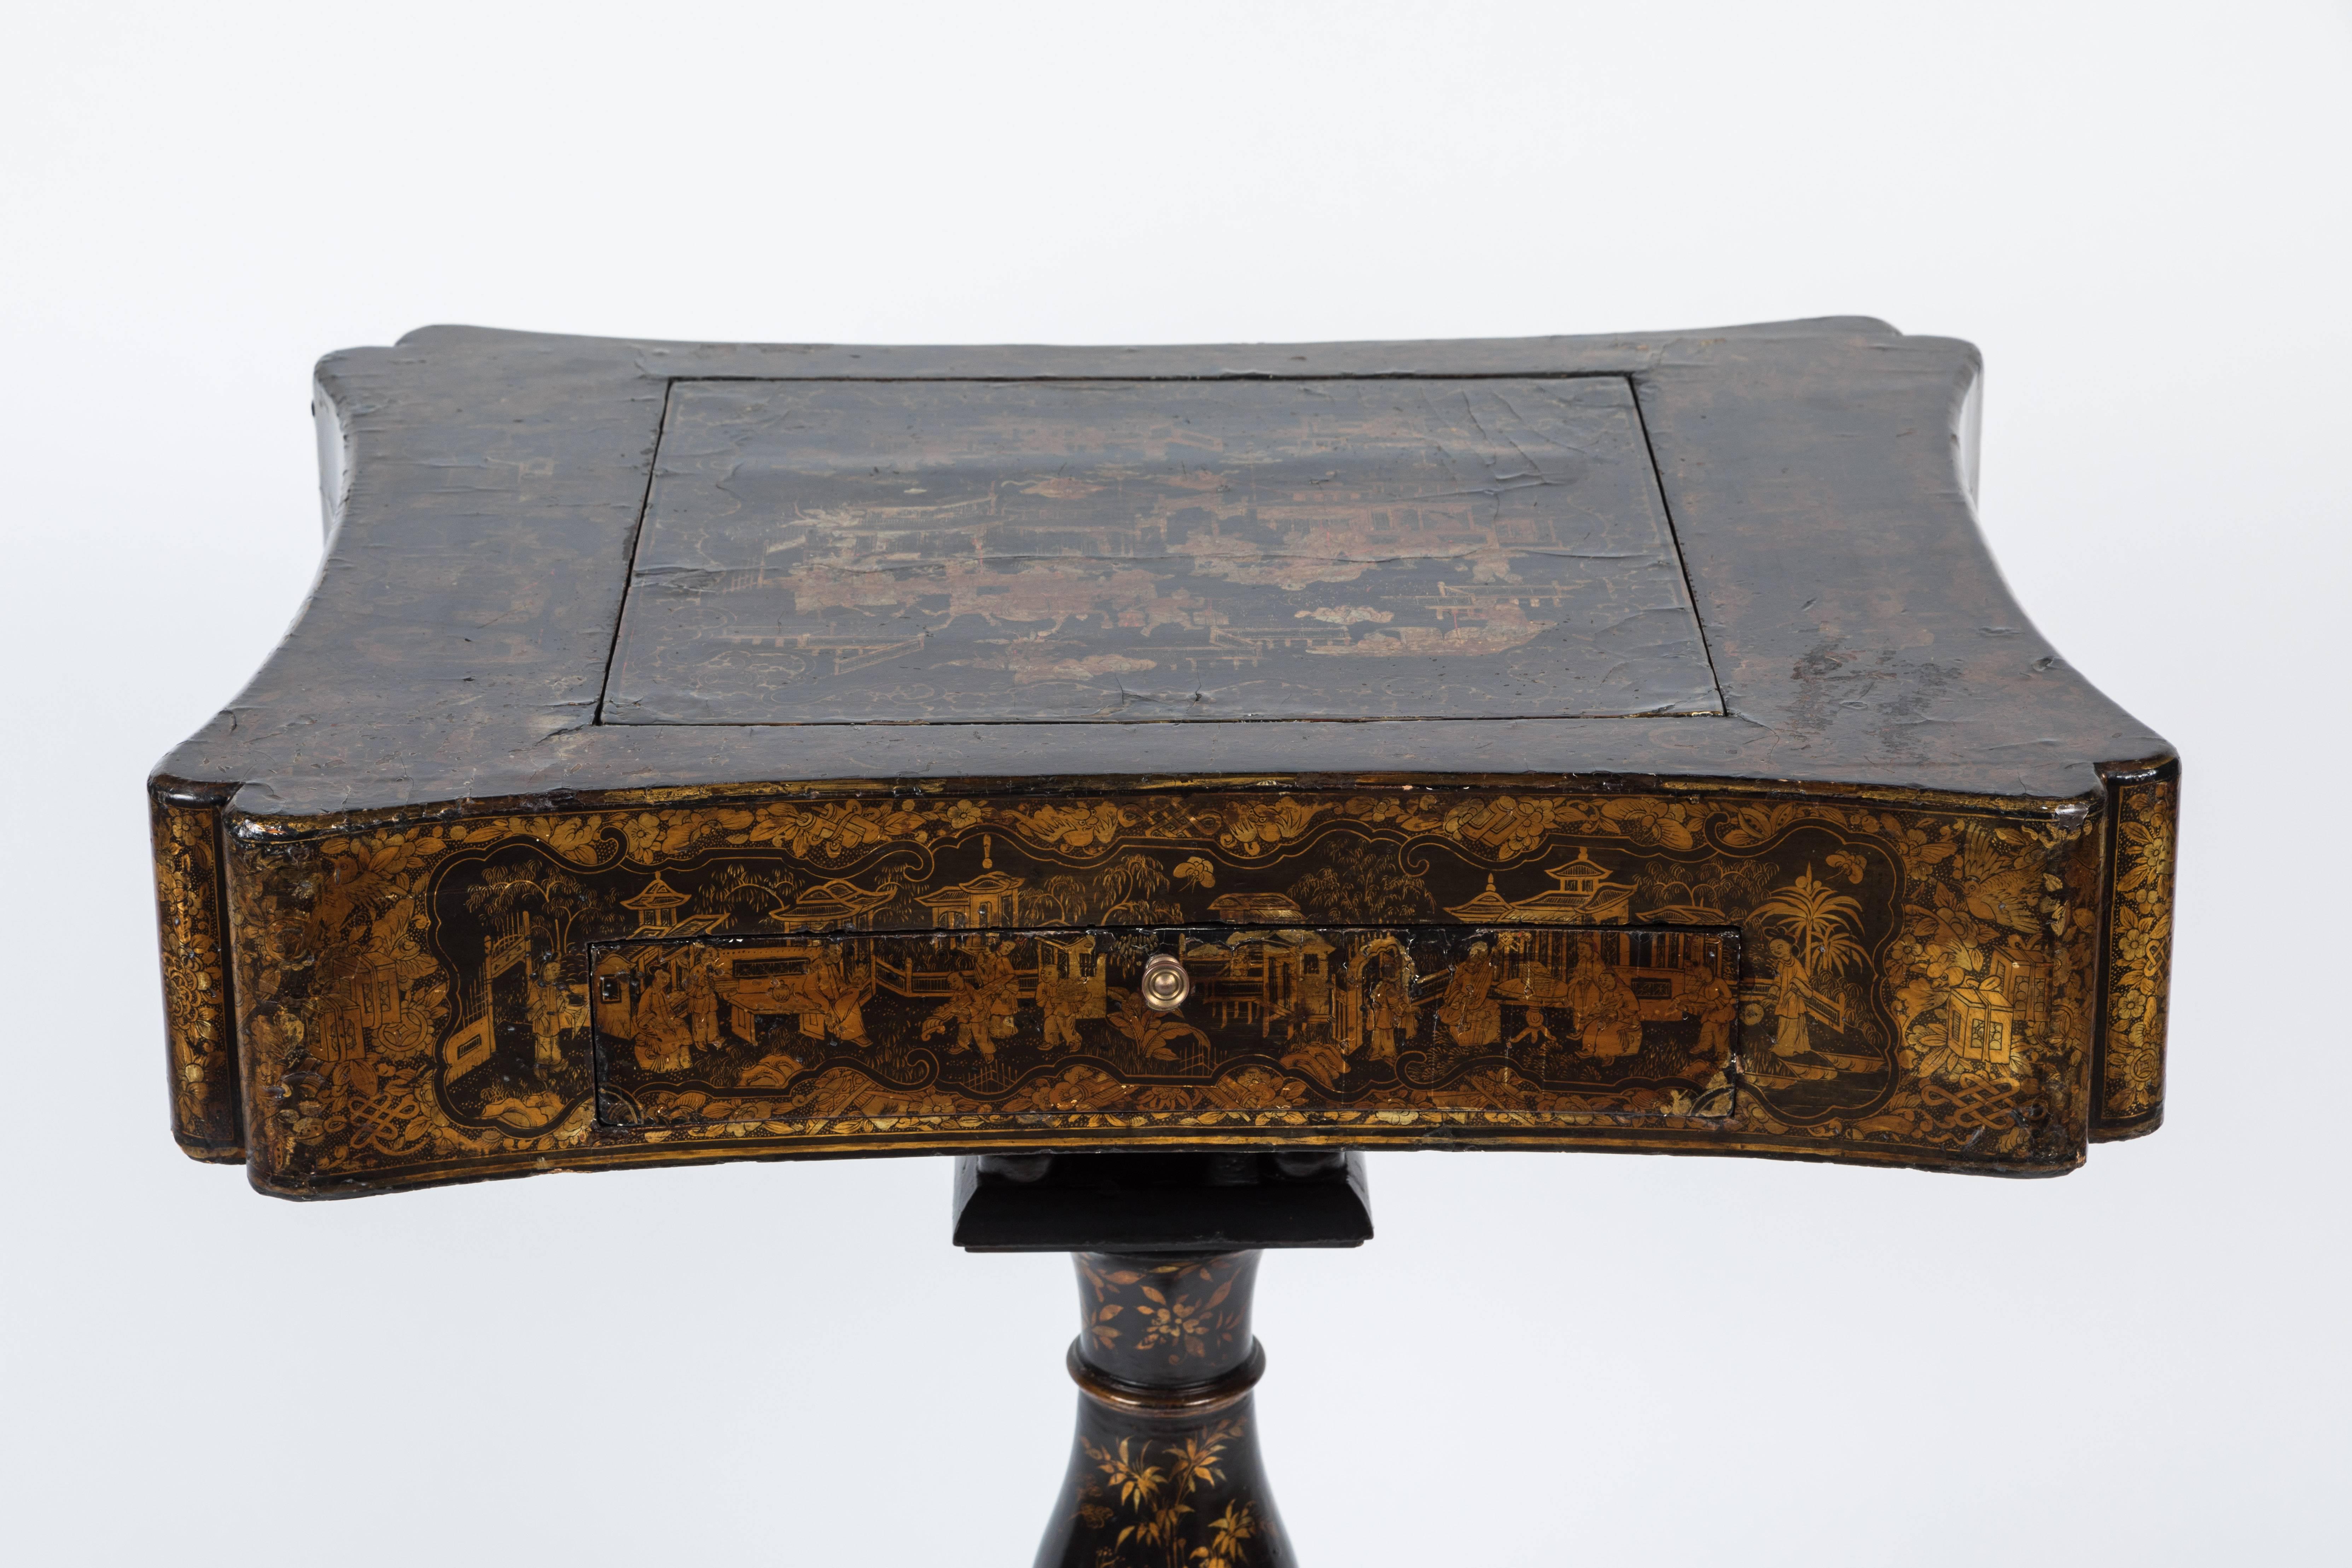 This antique English end table is rendered in the ornate Regency style. The entire pedestal design is made from lacquered wood decorated with gold-tone chinoiserie motifs. Smooth and polished, the top flips open to reveal various game boards.